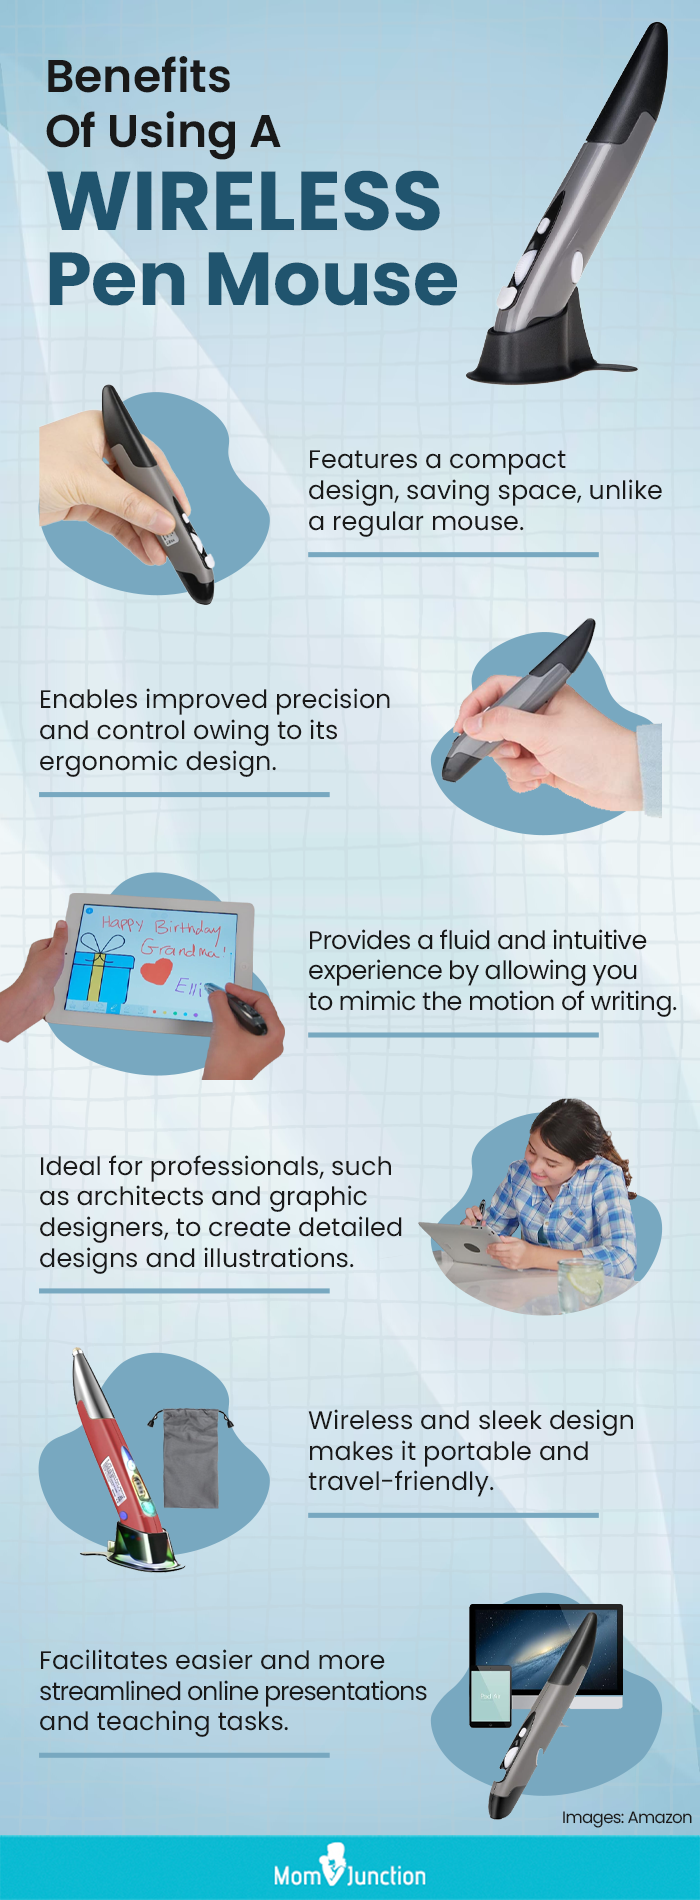 Benefits Of Using A Wireless Pen Mouse (infographic)